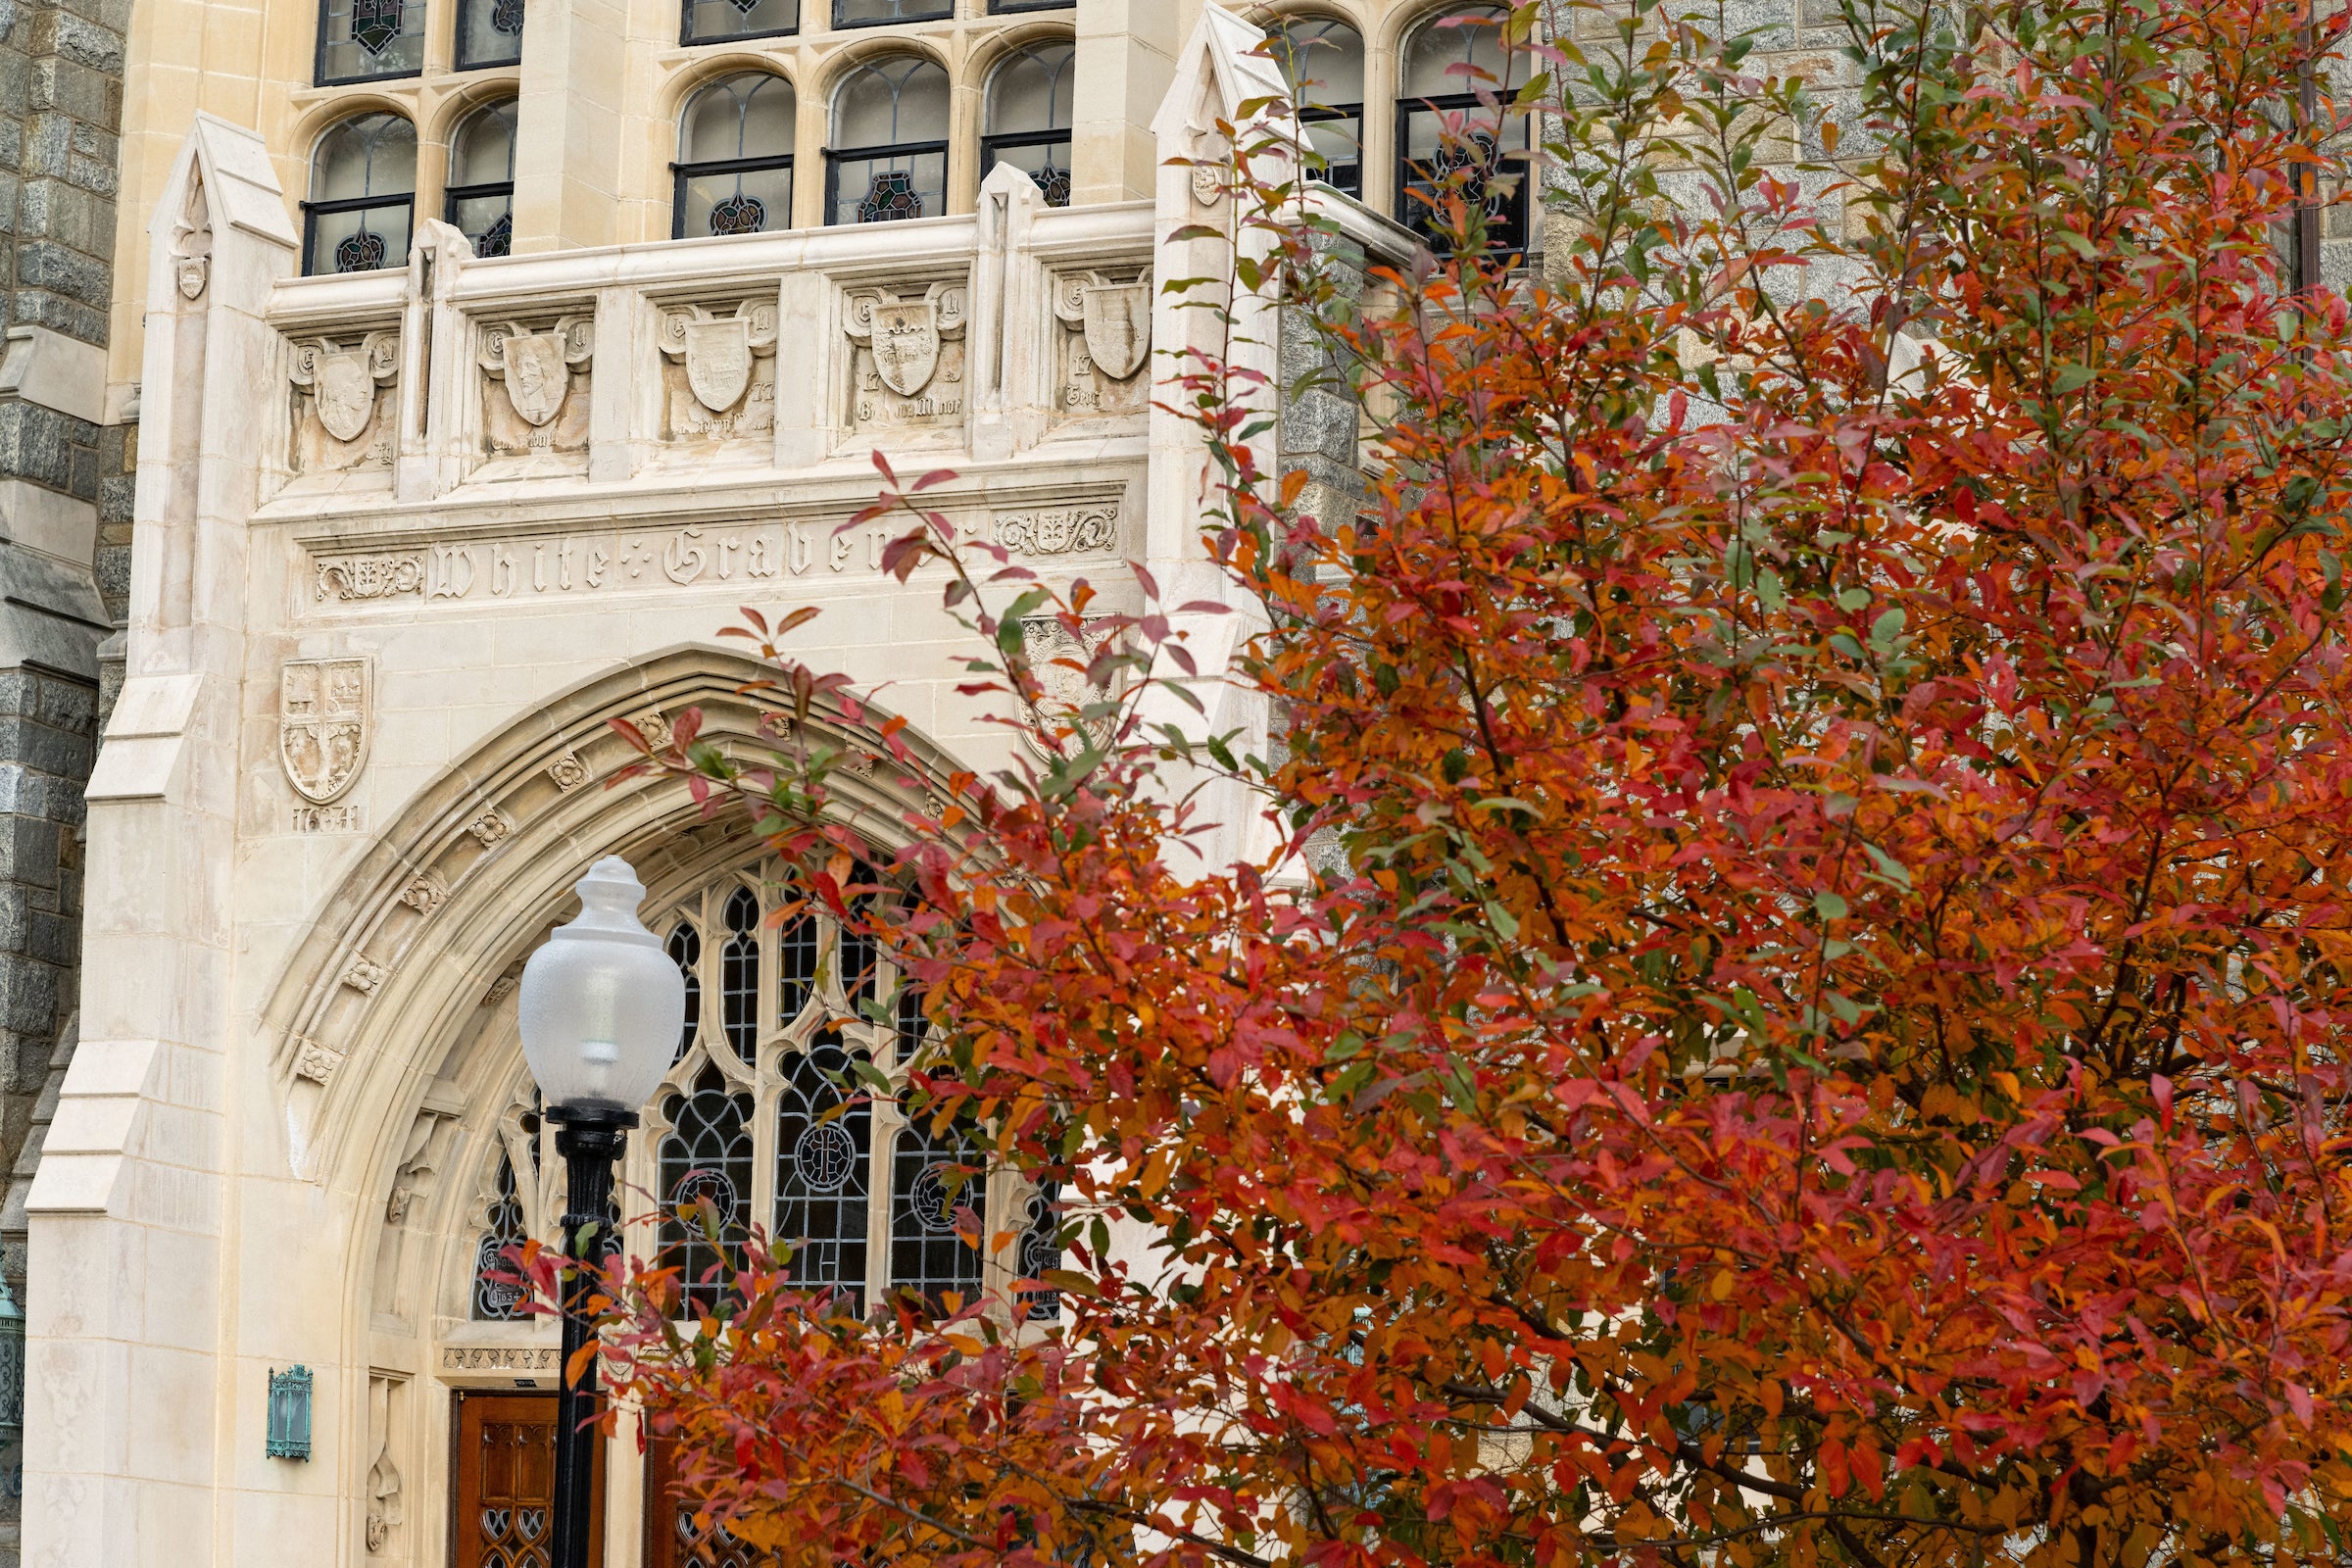 Image of White- Gravenor Hall with fall foliage in the foreground